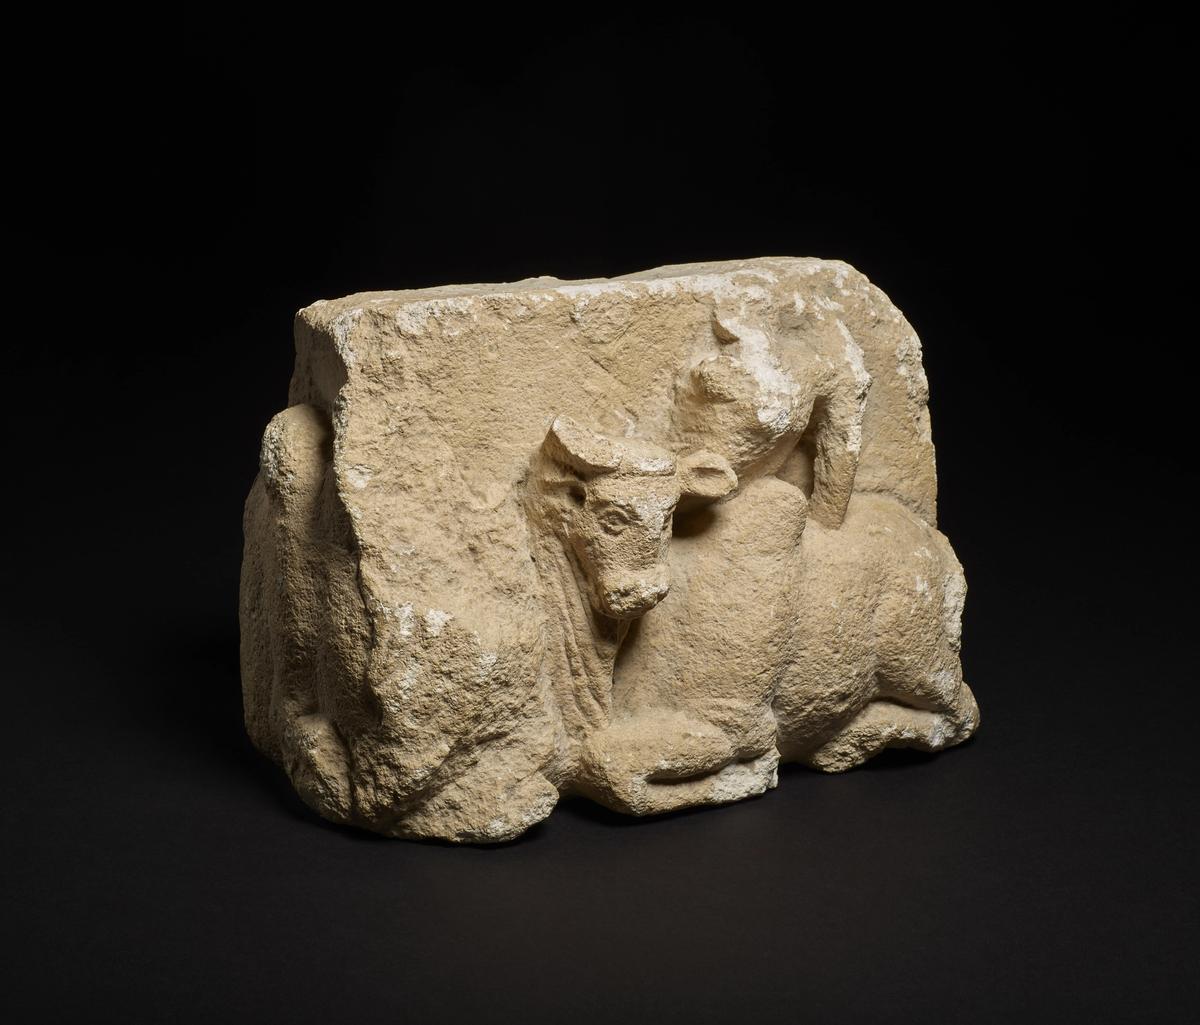 The sculpture, which shows two humped bulls, comes from the Surkh Kotal site in northern Afghanistan Courtesy of the British Museum